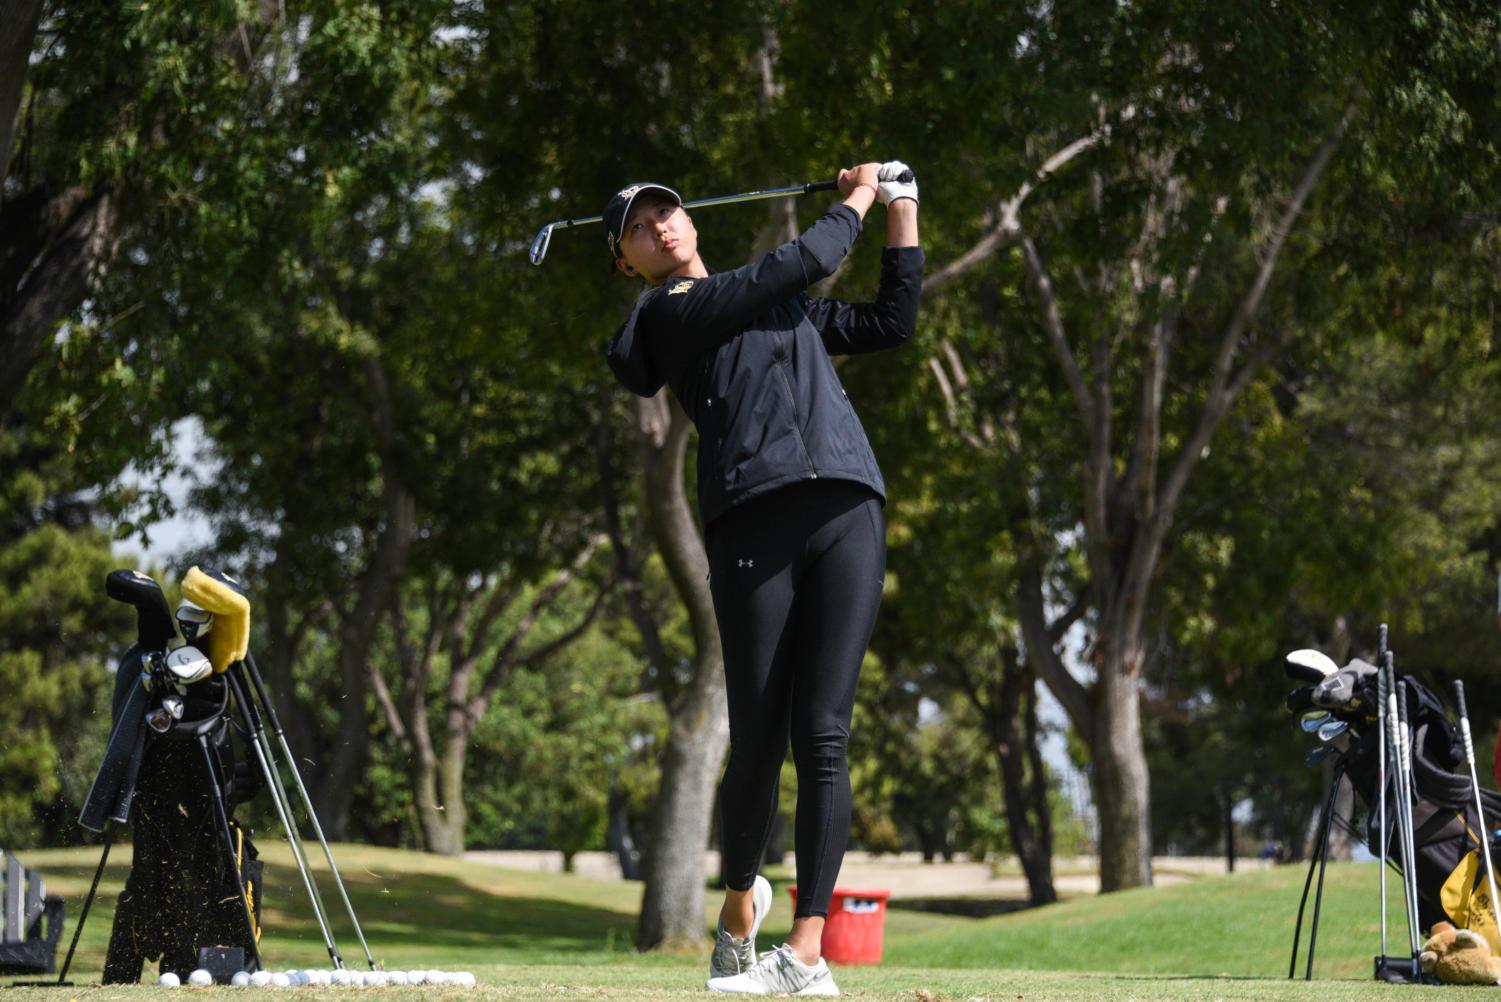 LBSU sophomore Euna Pak shot 70, 70 and 71 for a total of 5-under par 211 and placed third at the UC Irvine Invitational where the 49ers claimed their first victory in over two years.